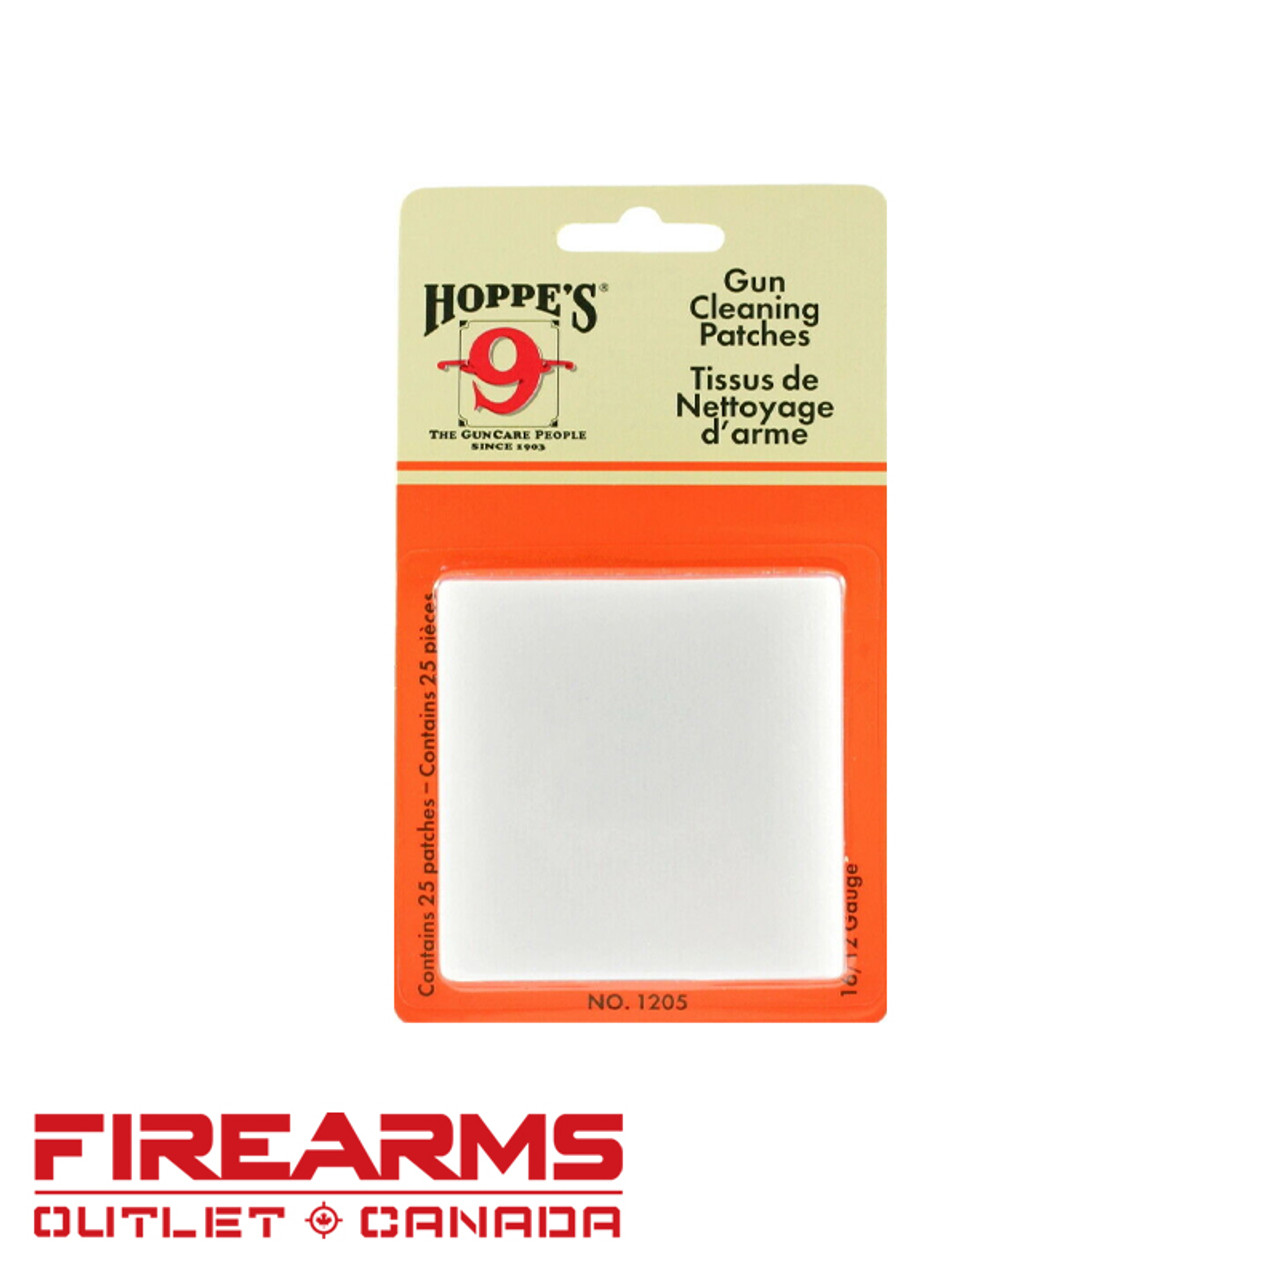 Hoppe's Gun Cleaning Patches - 16-12 Gauge, 25 Pack  [1205]